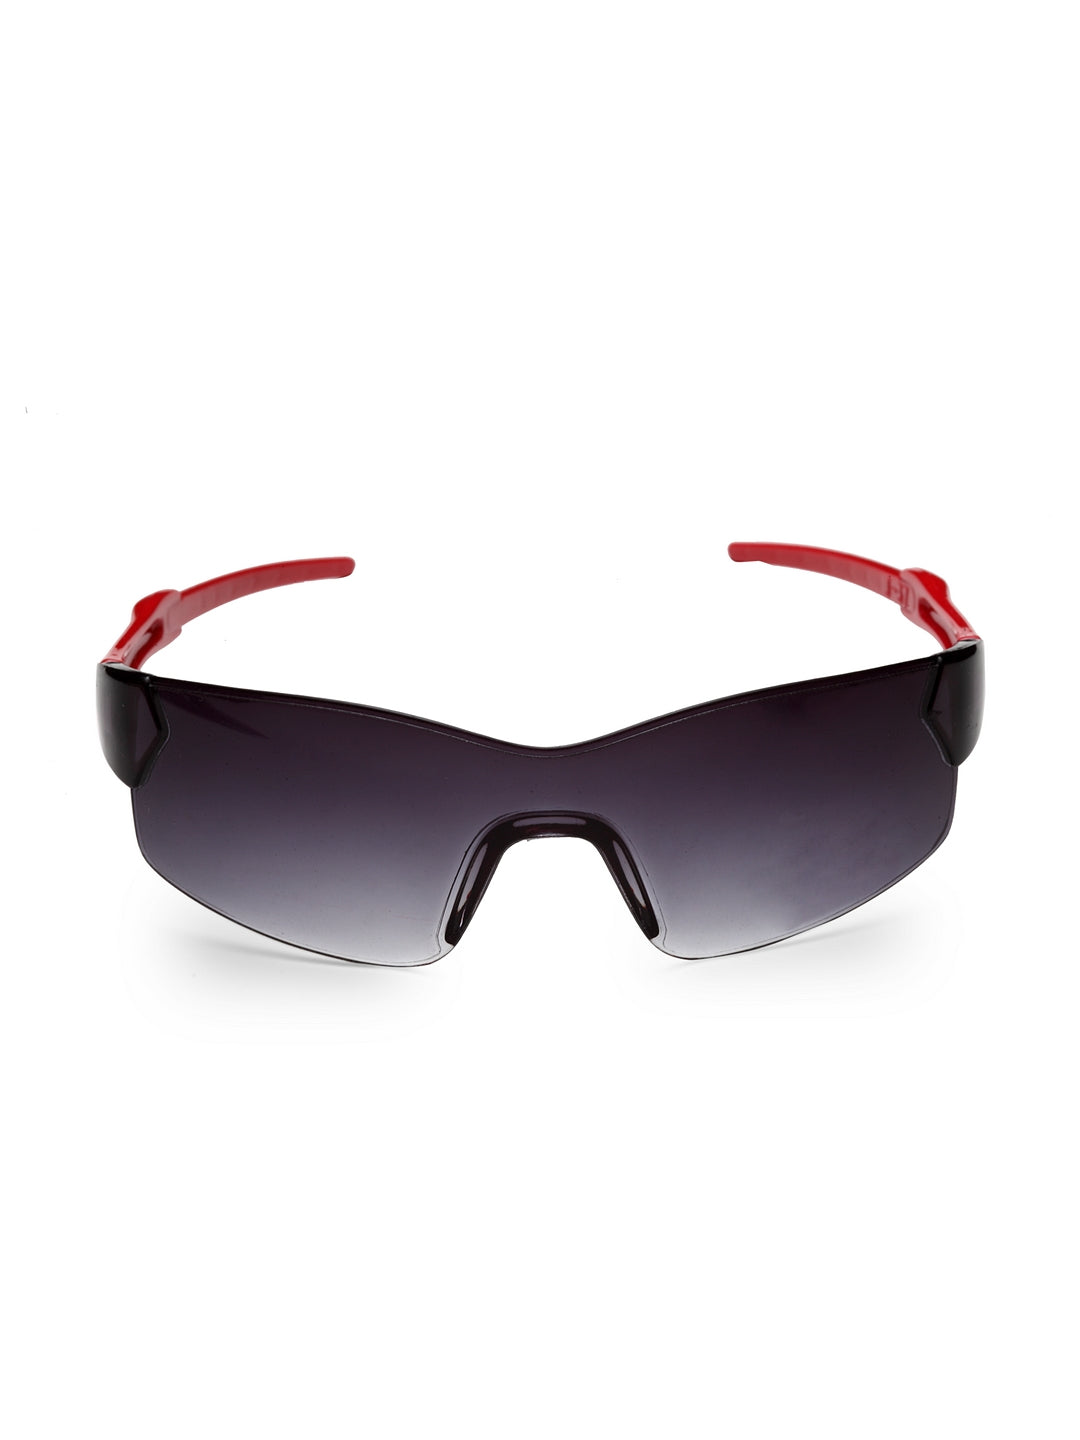 Stol'n Unisex Polarized UV-Protected Sports Sunglasses for Kids - Red